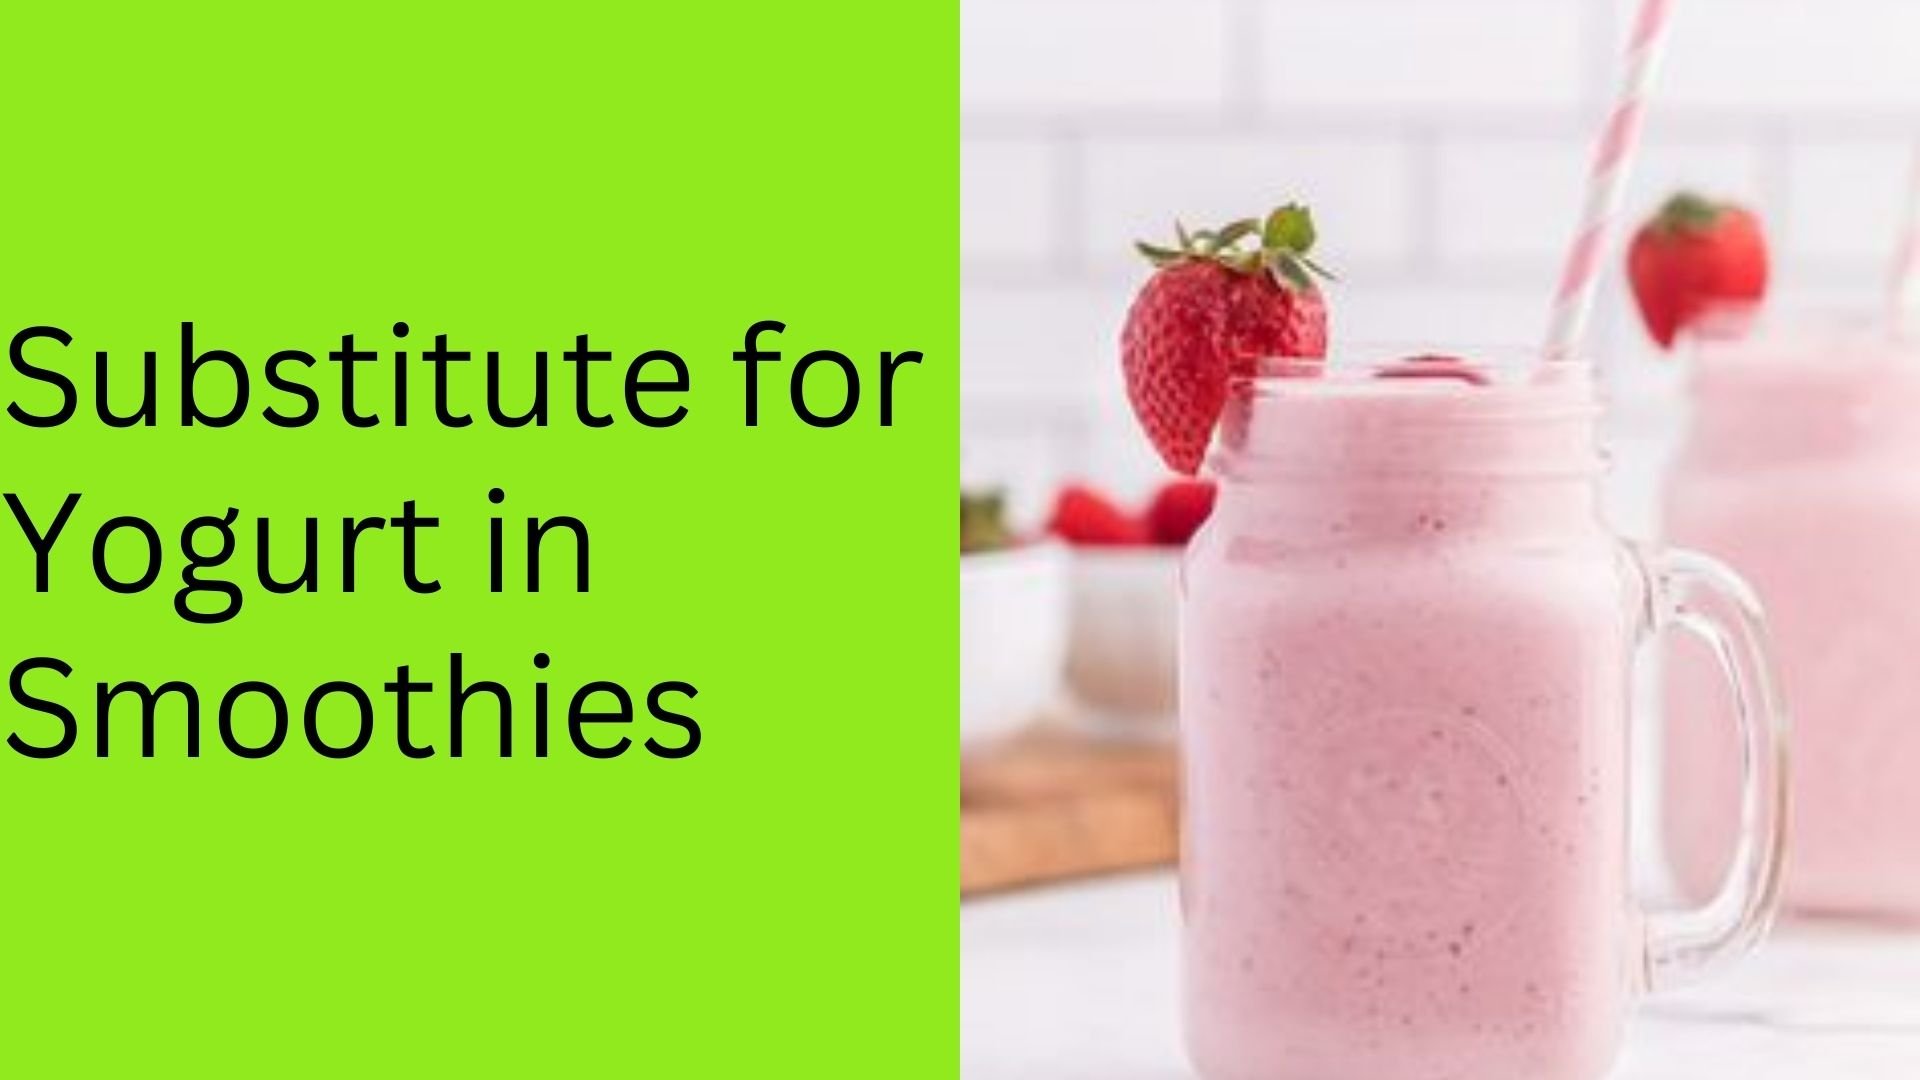 Substitute for Yogurt in Smoothies